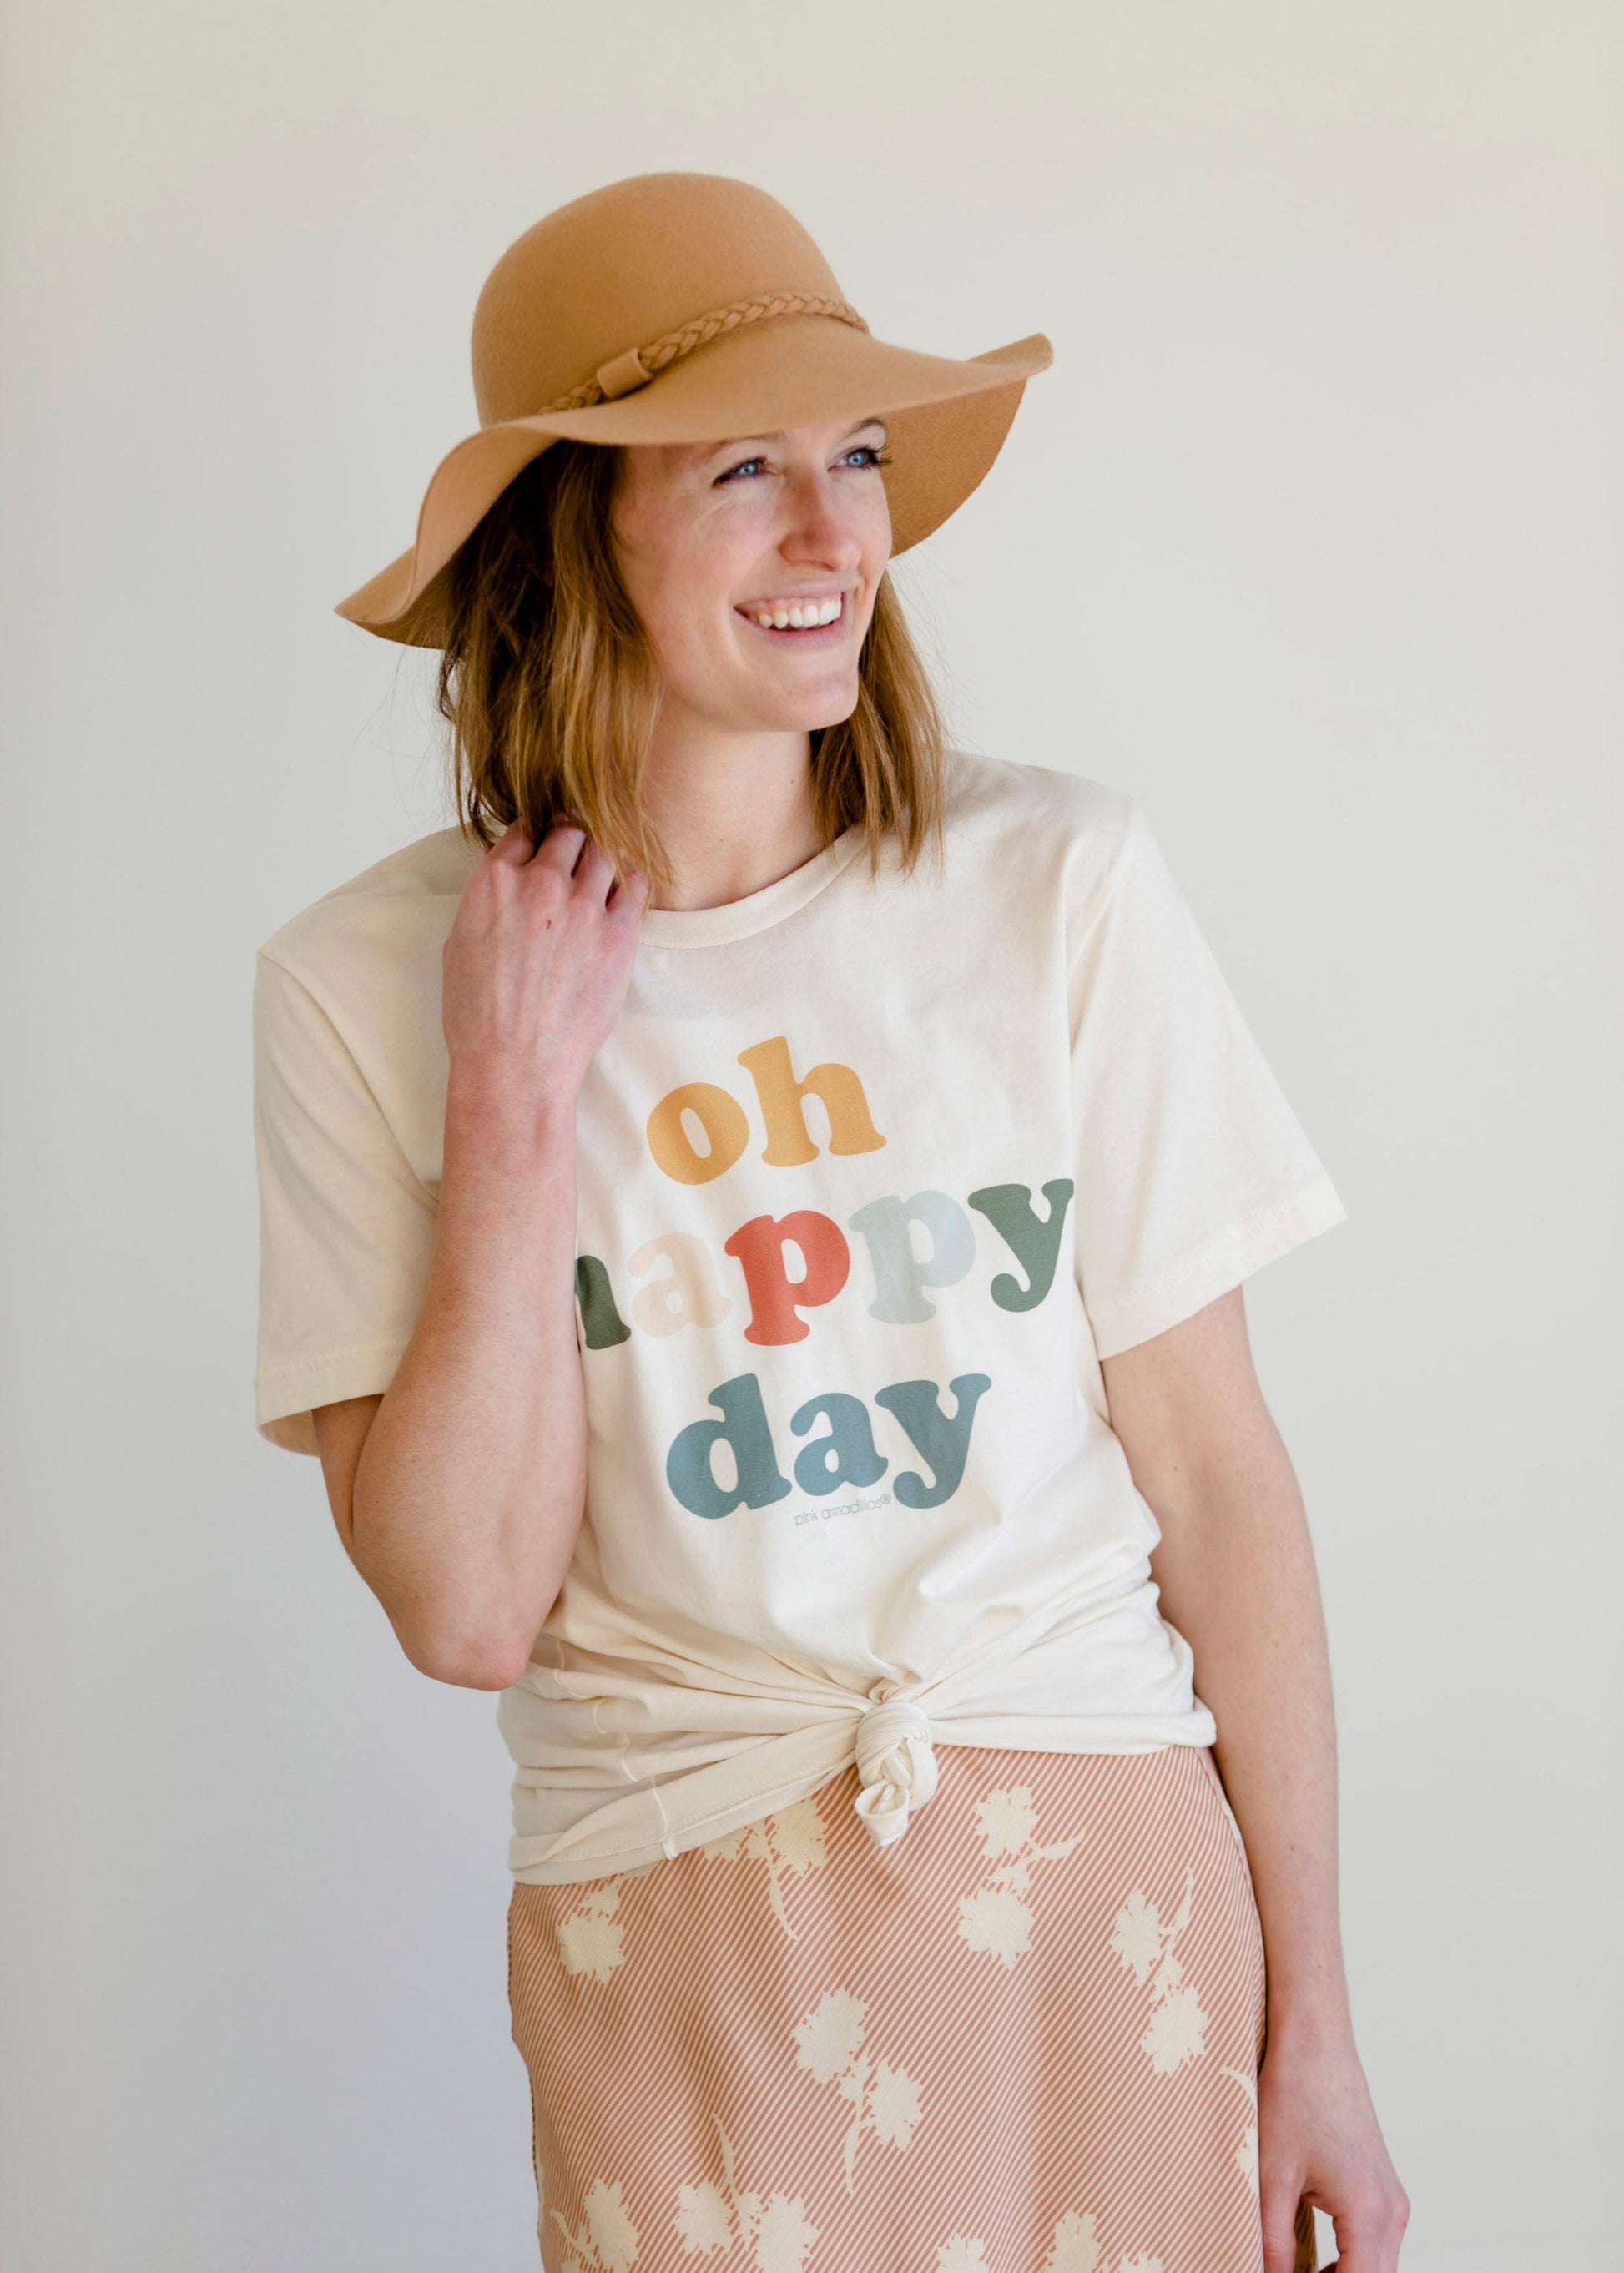 Oh Happy Day Vintage Tee - FINAL SALE Tops